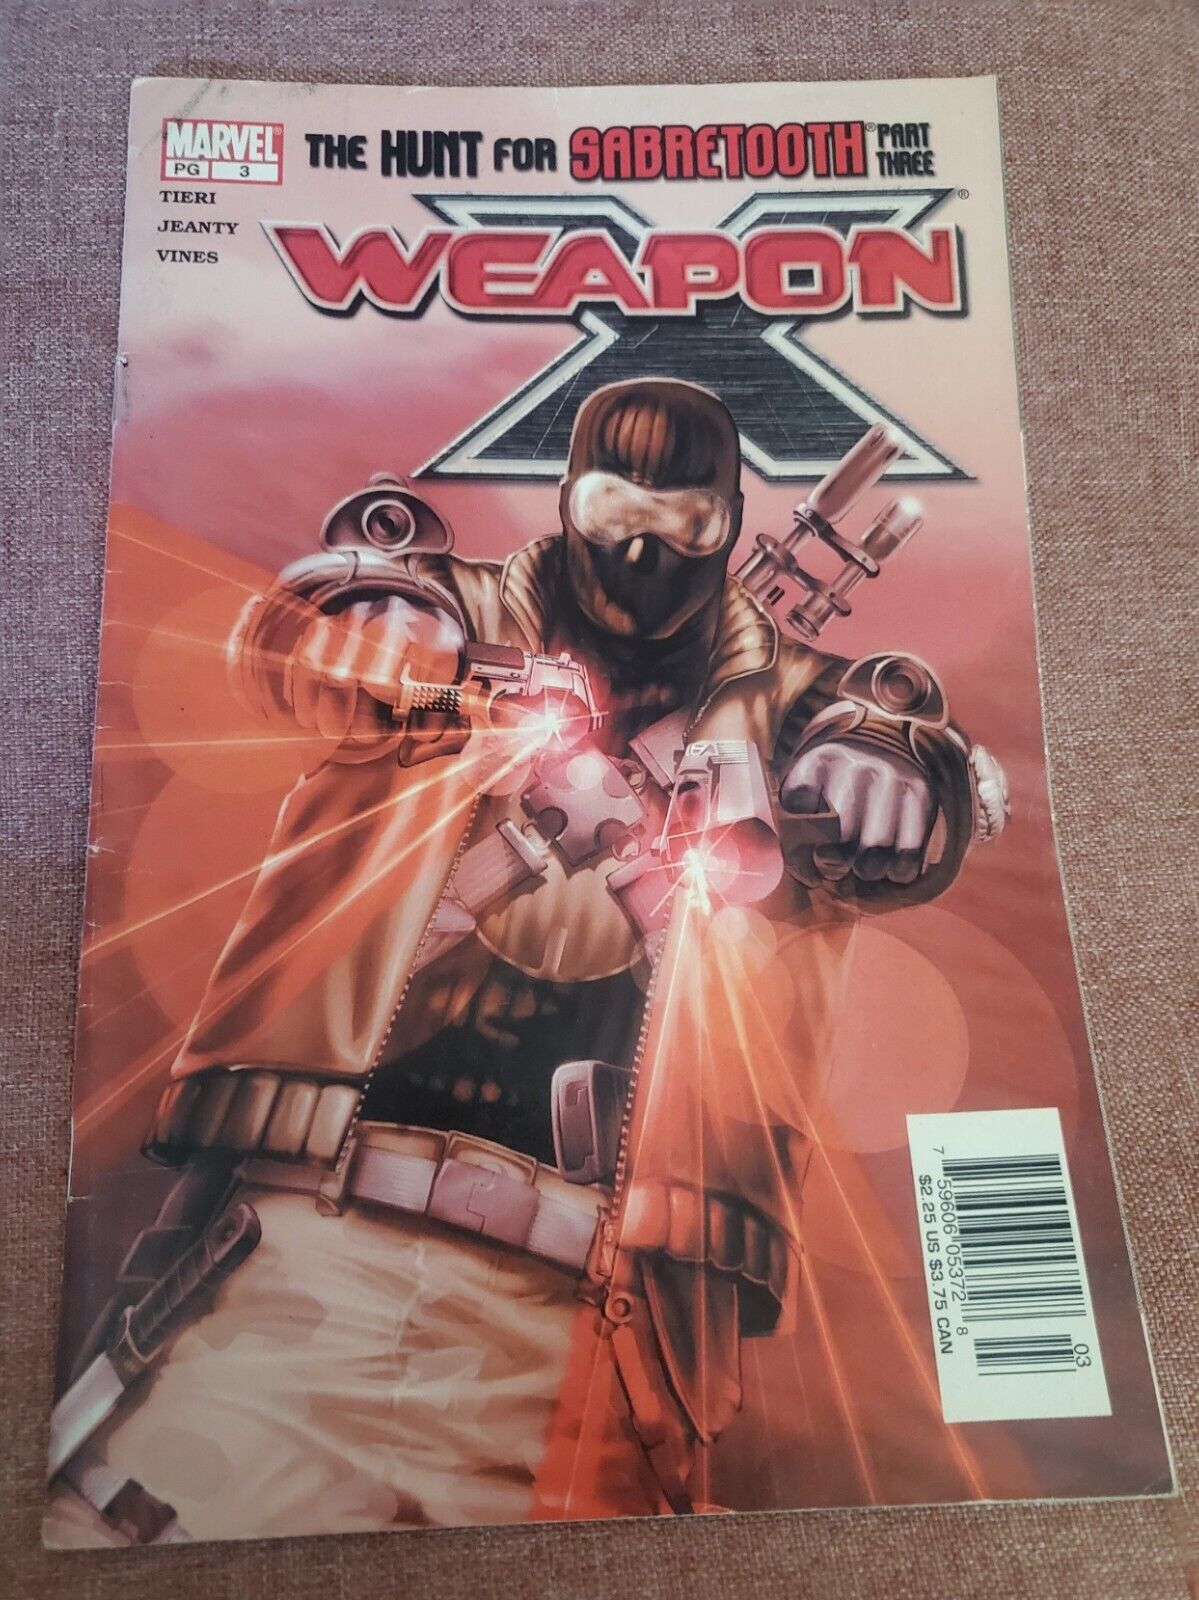 Weapon X Vol 1. No 3, Janu Tary 2003. The Hunt for Sabretooth Part Three